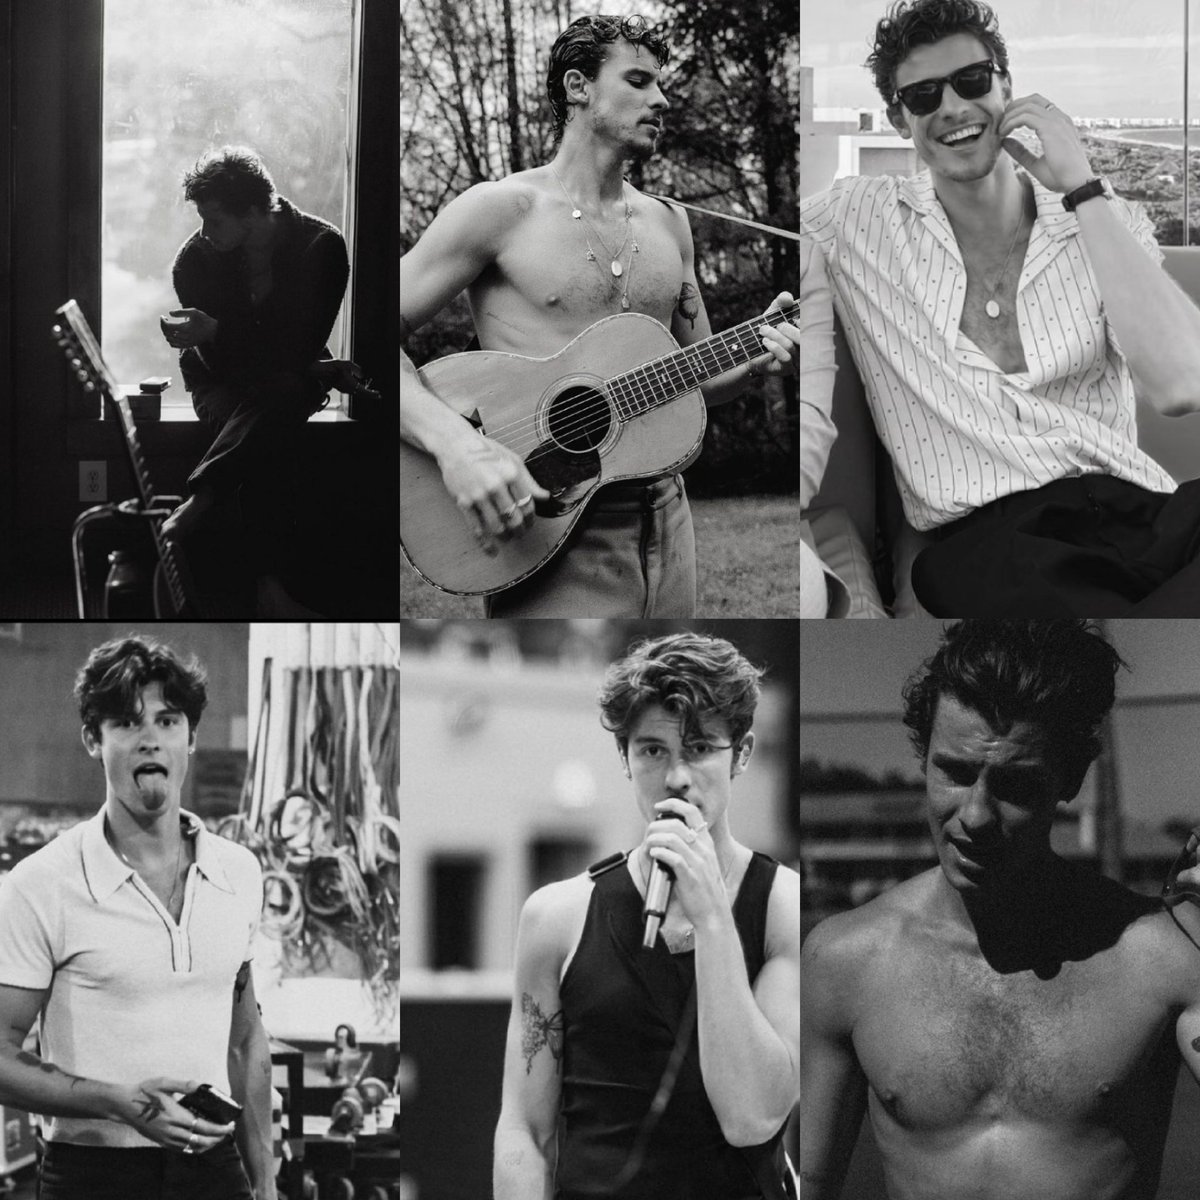 shawn mendes in black & white